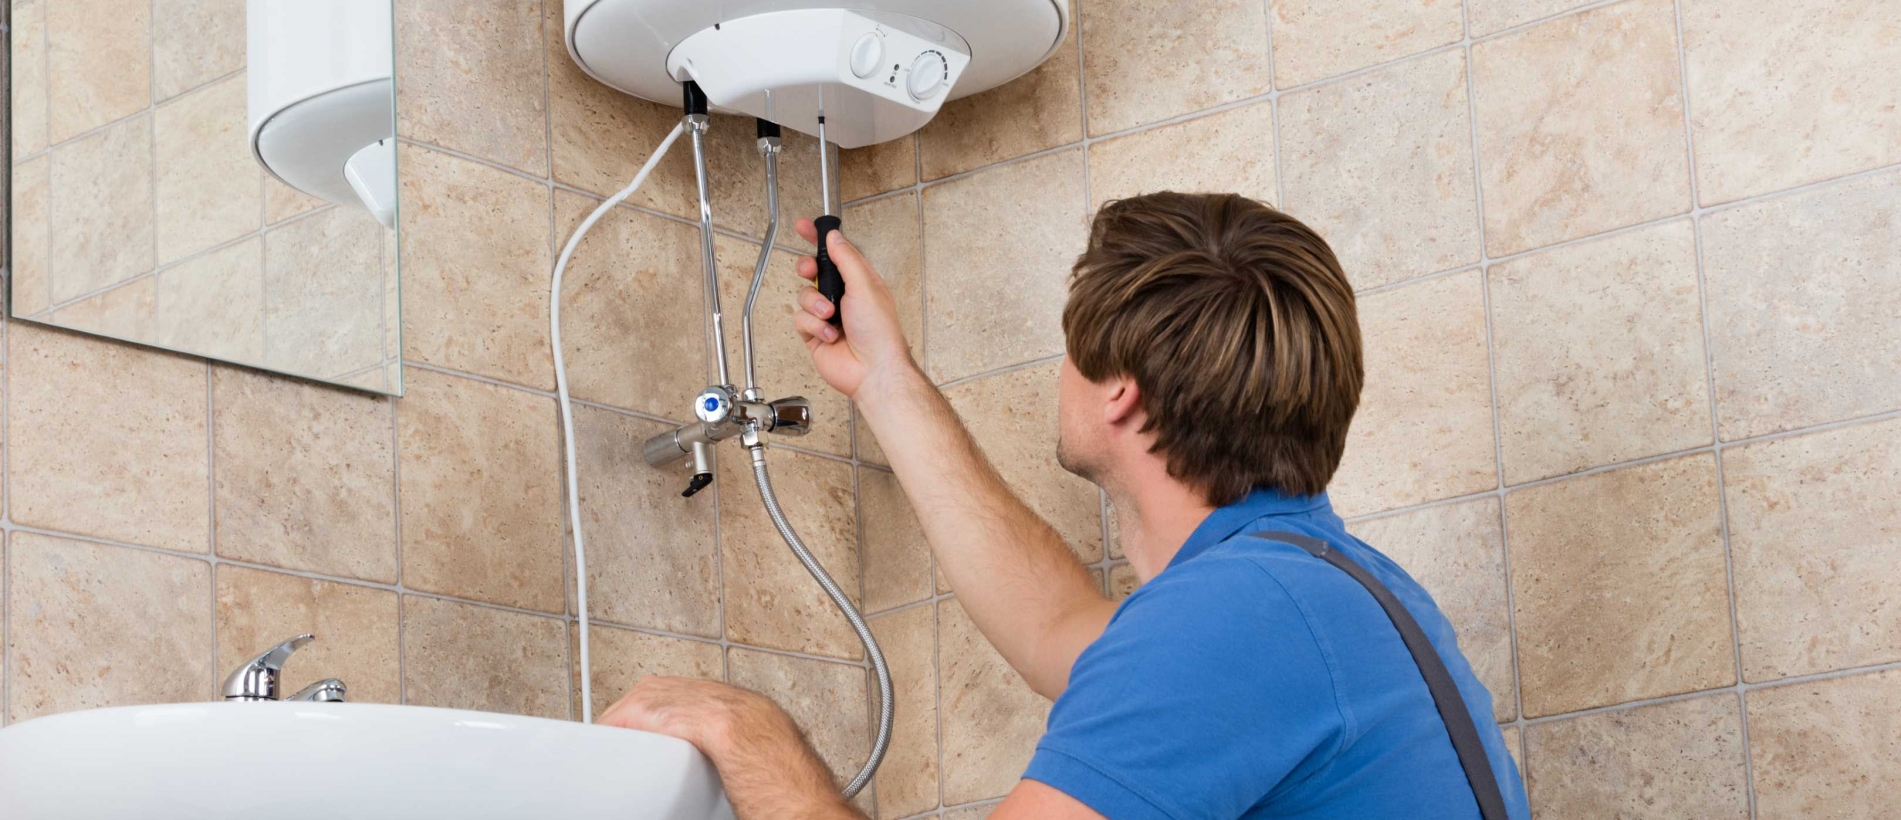 Why Need a Professional Plumber to Repair a Blocked Drain?